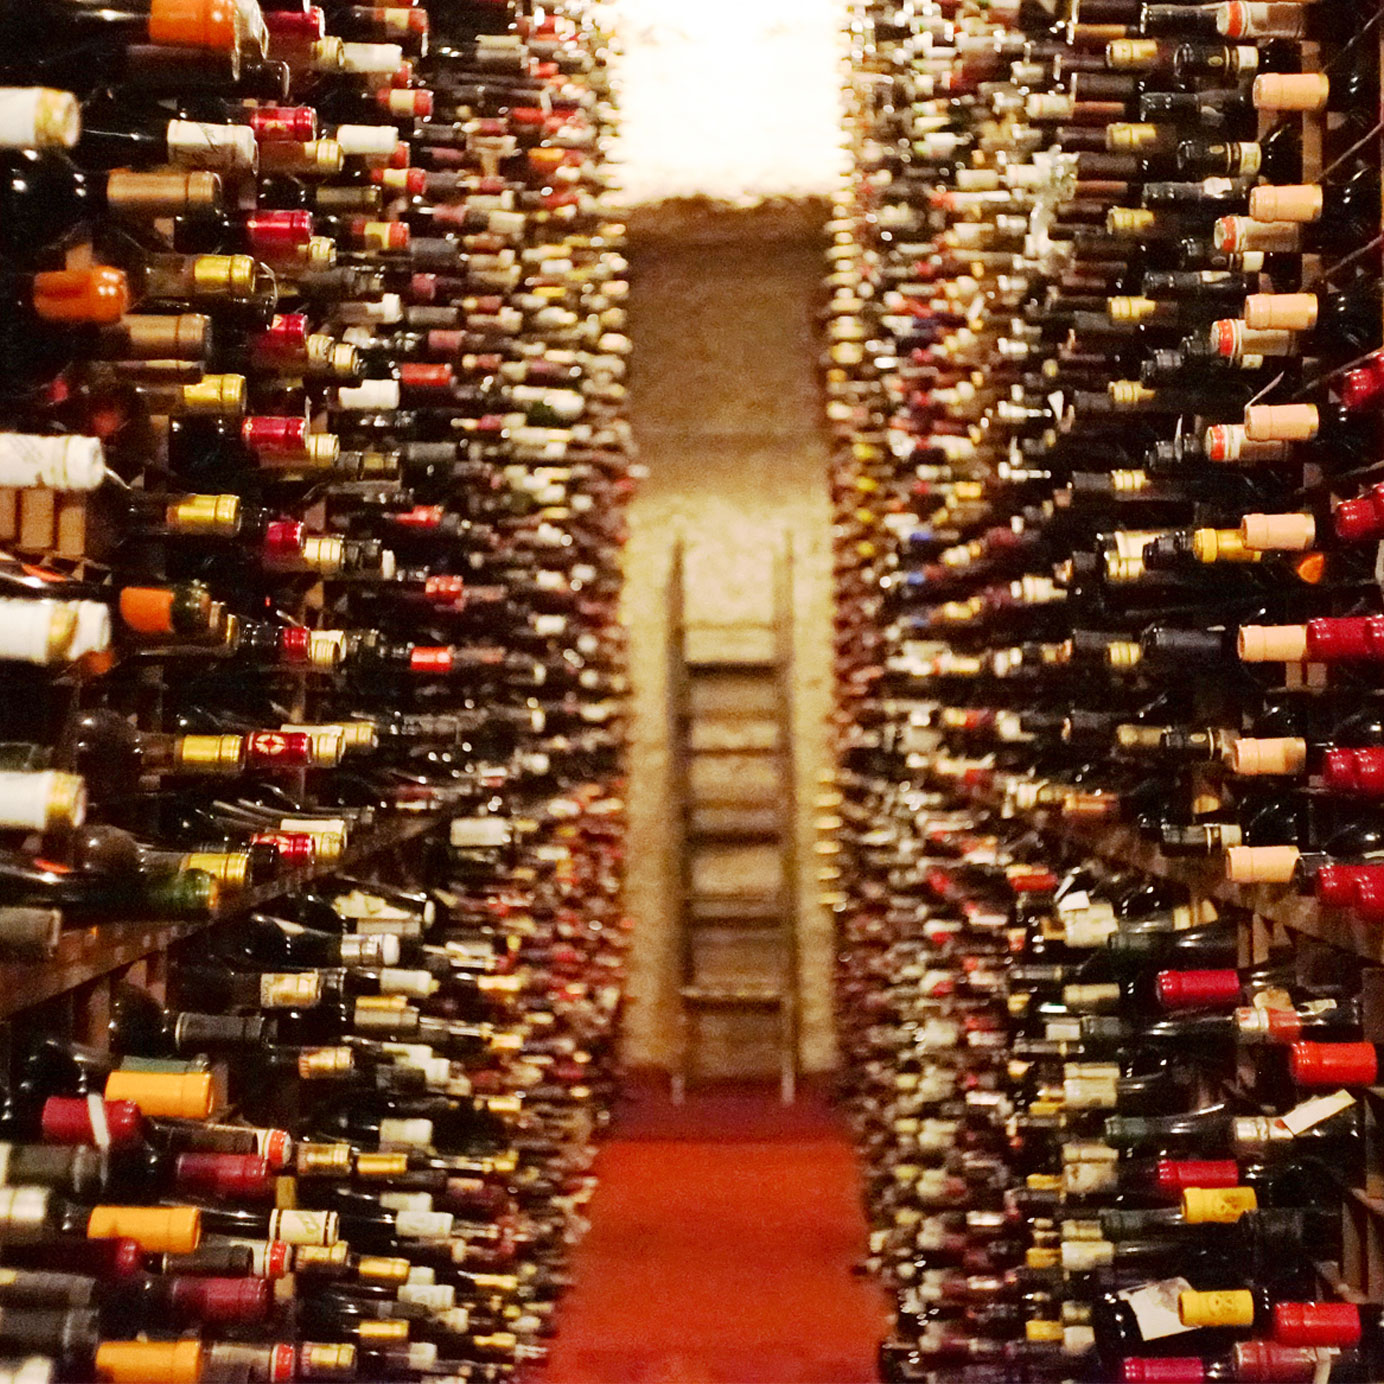 Bern’s Steak House, With the Biggest Wine Collection in the World, Is Nostalgic for an America That Never Was